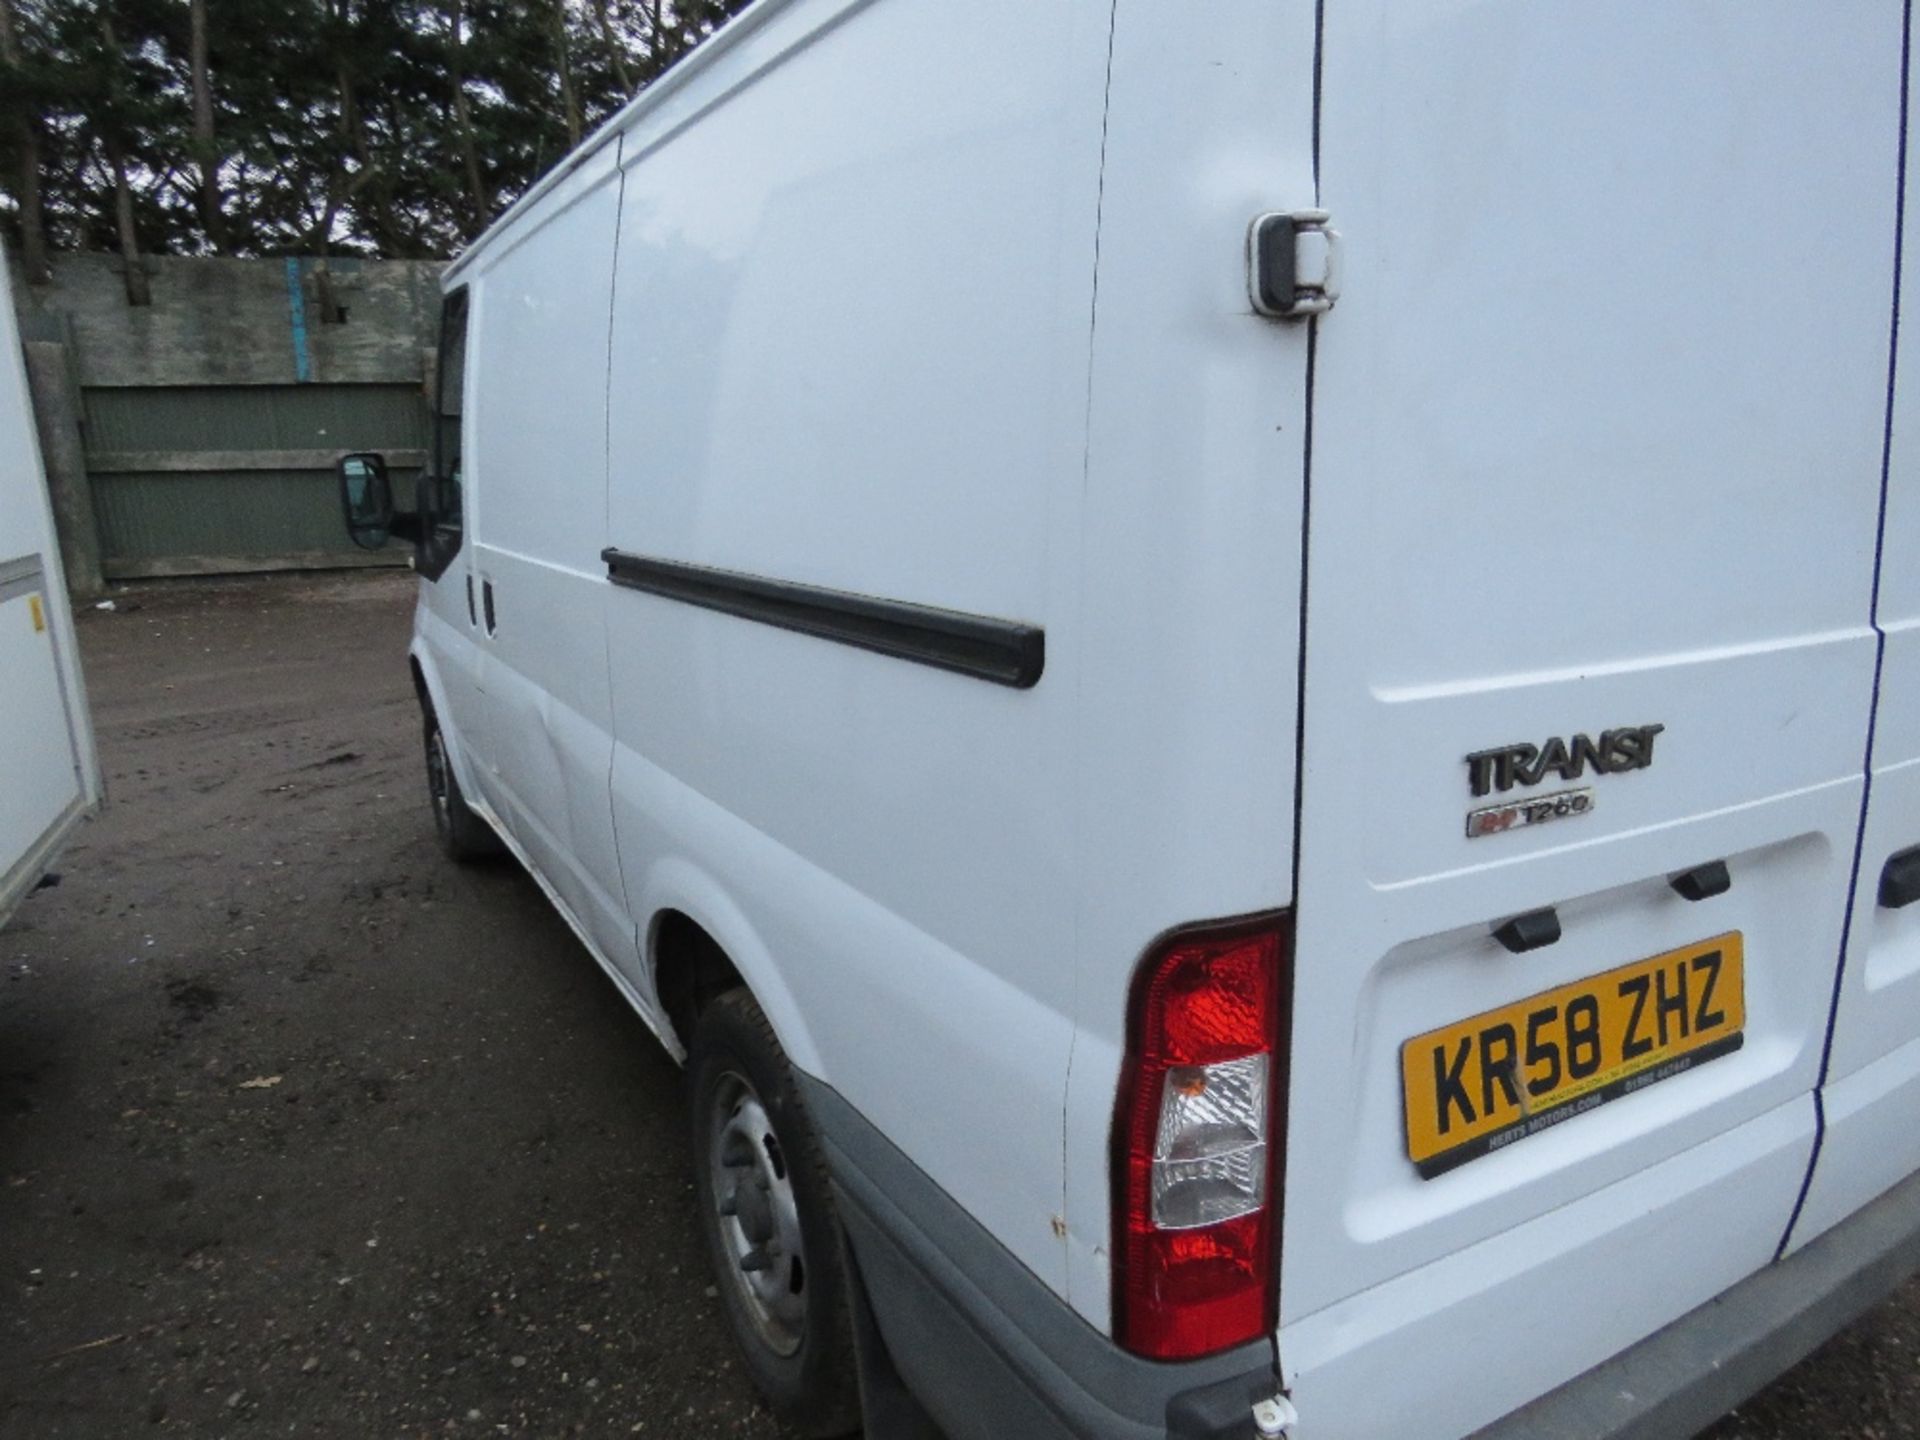 FORD TRANSIT 85 T260M FWD PANEL VAN REG:KR58 ZHZ. 150,769 REC HRS. DIRECT FROM LOCAL COMPANY SELLING - Image 4 of 15